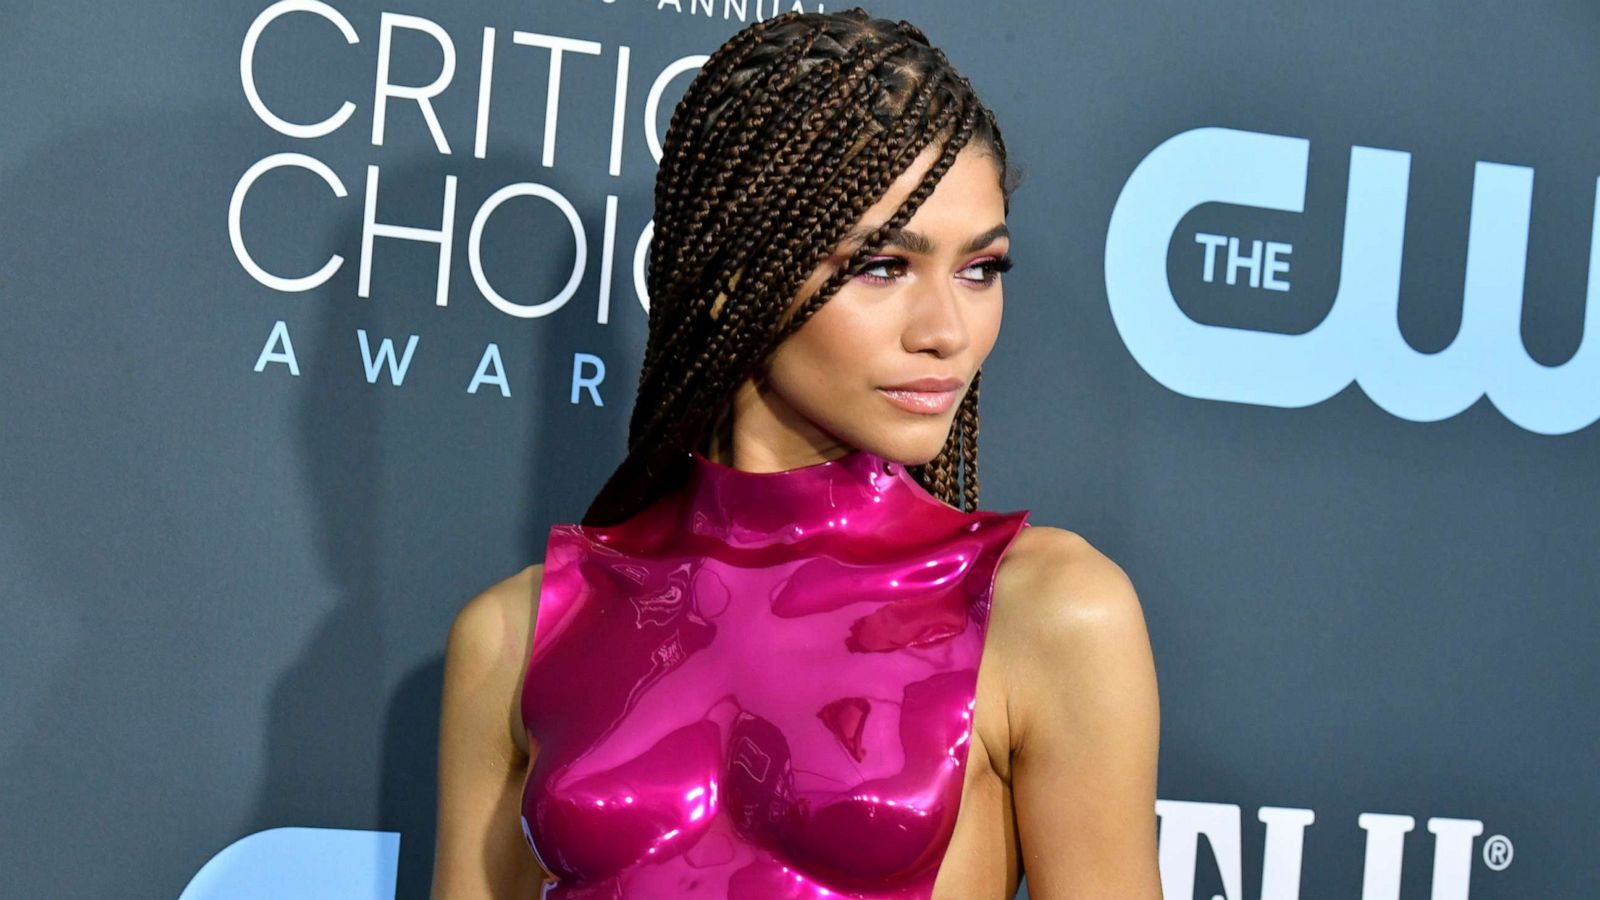 Zendaya twins with Gwyneth Paltrow in $15,000 Tom Ford chrome breastplate  for 2020 Critics' Choice Awards - Good Morning America